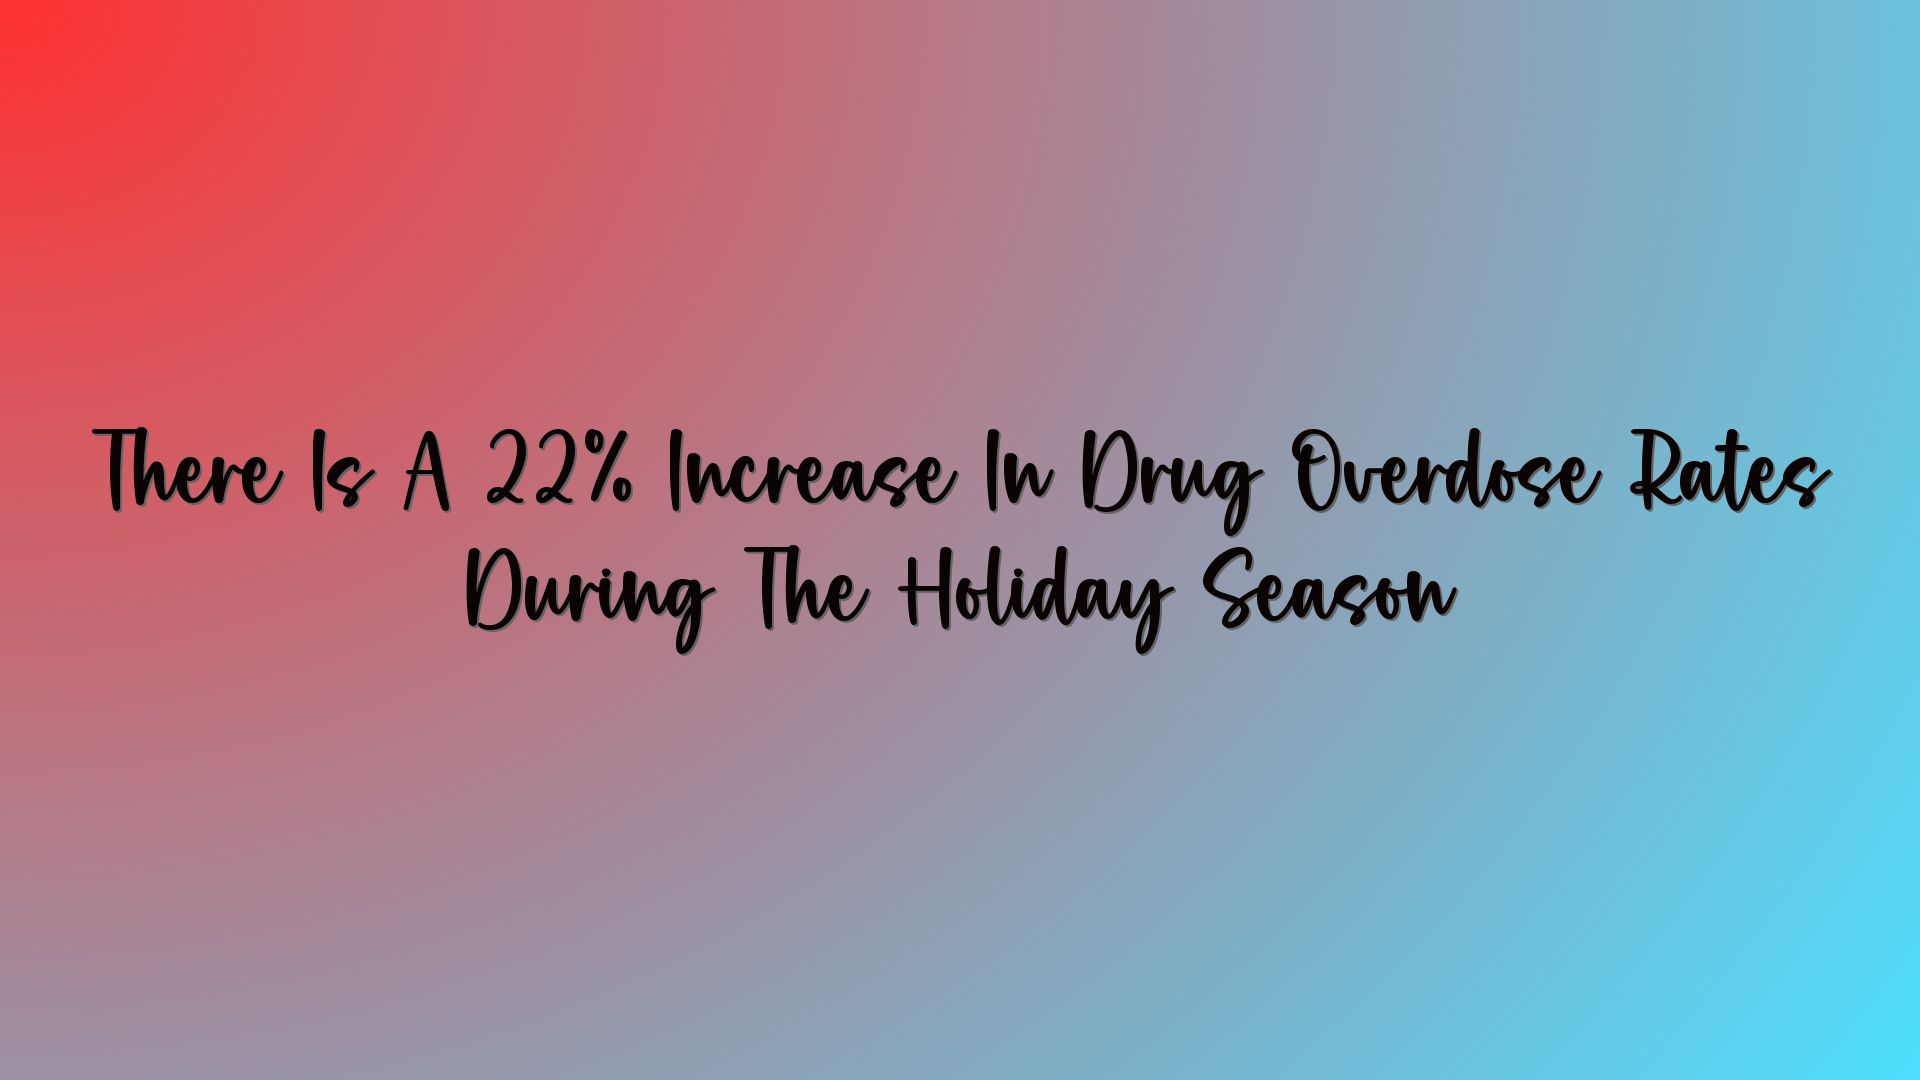 There Is A 22% Increase In Drug Overdose Rates During The Holiday Season